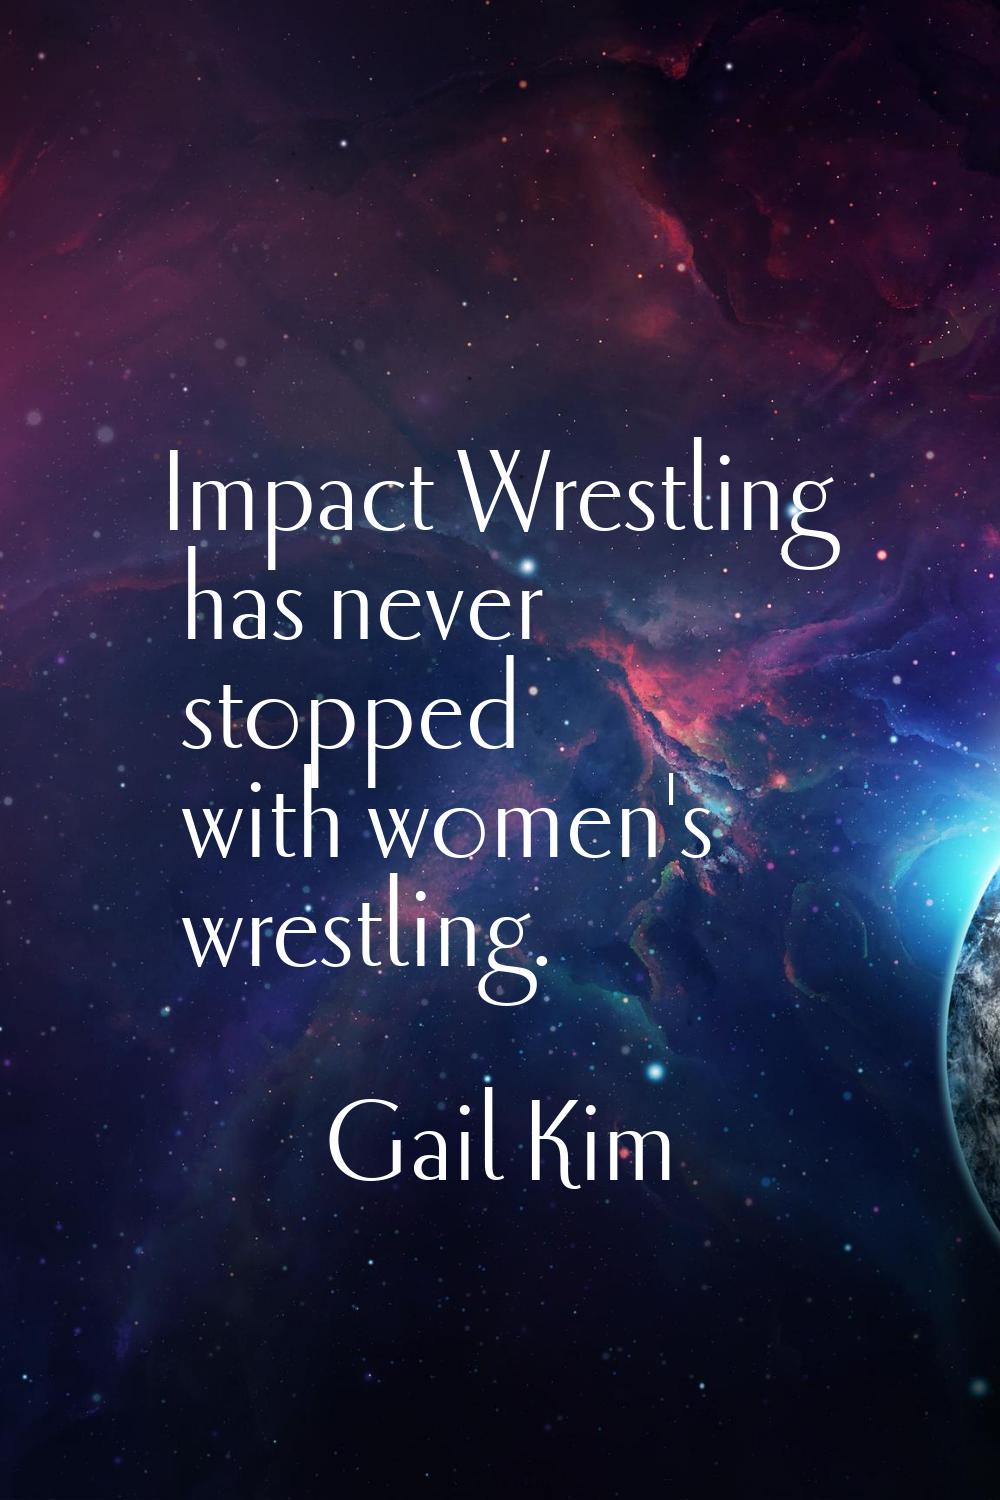 Impact Wrestling has never stopped with women's wrestling.